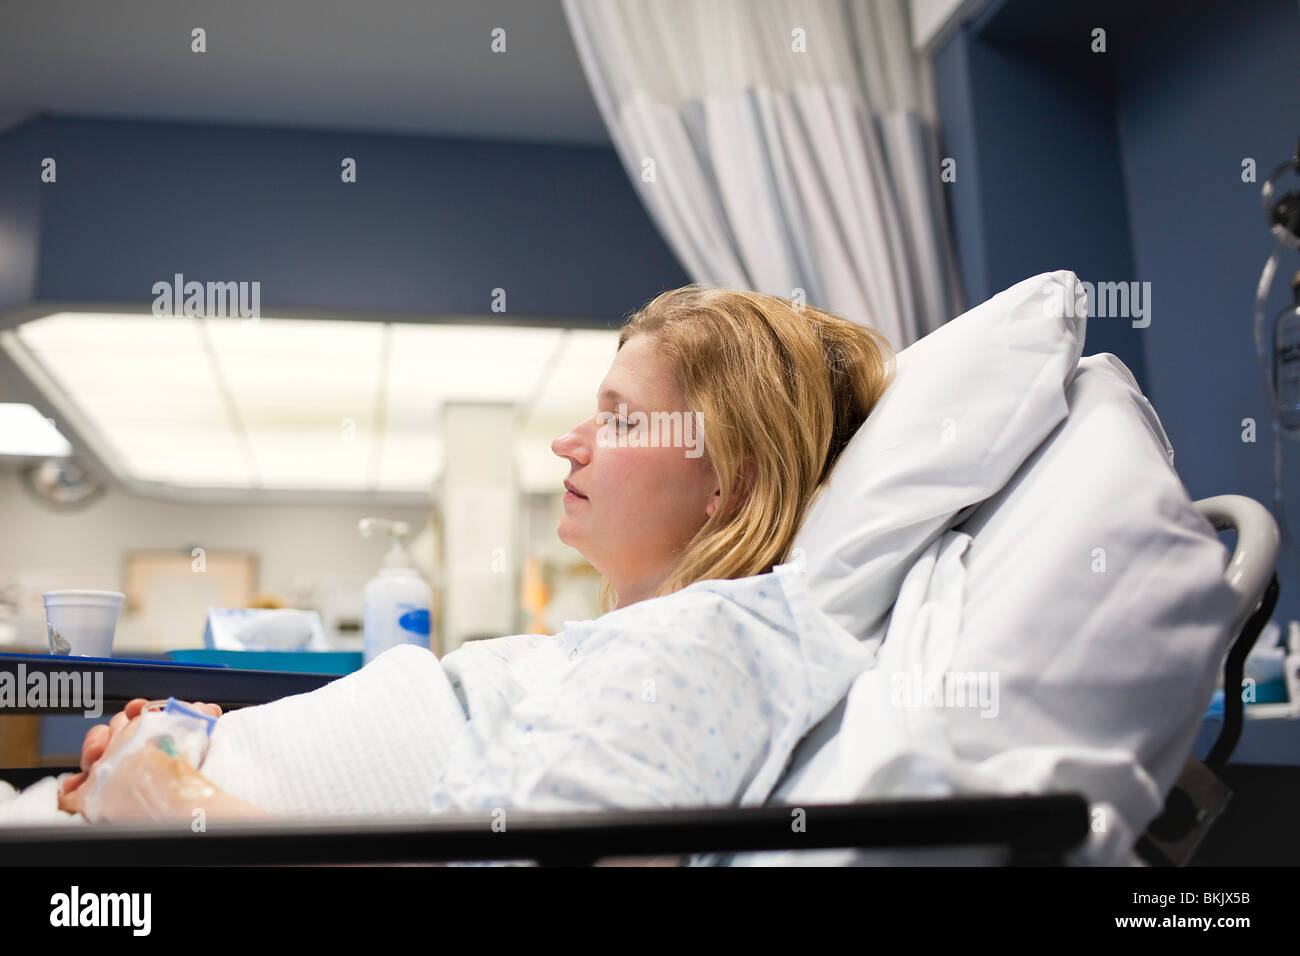 Woman recovering in a hospital room bed. Stock Photo